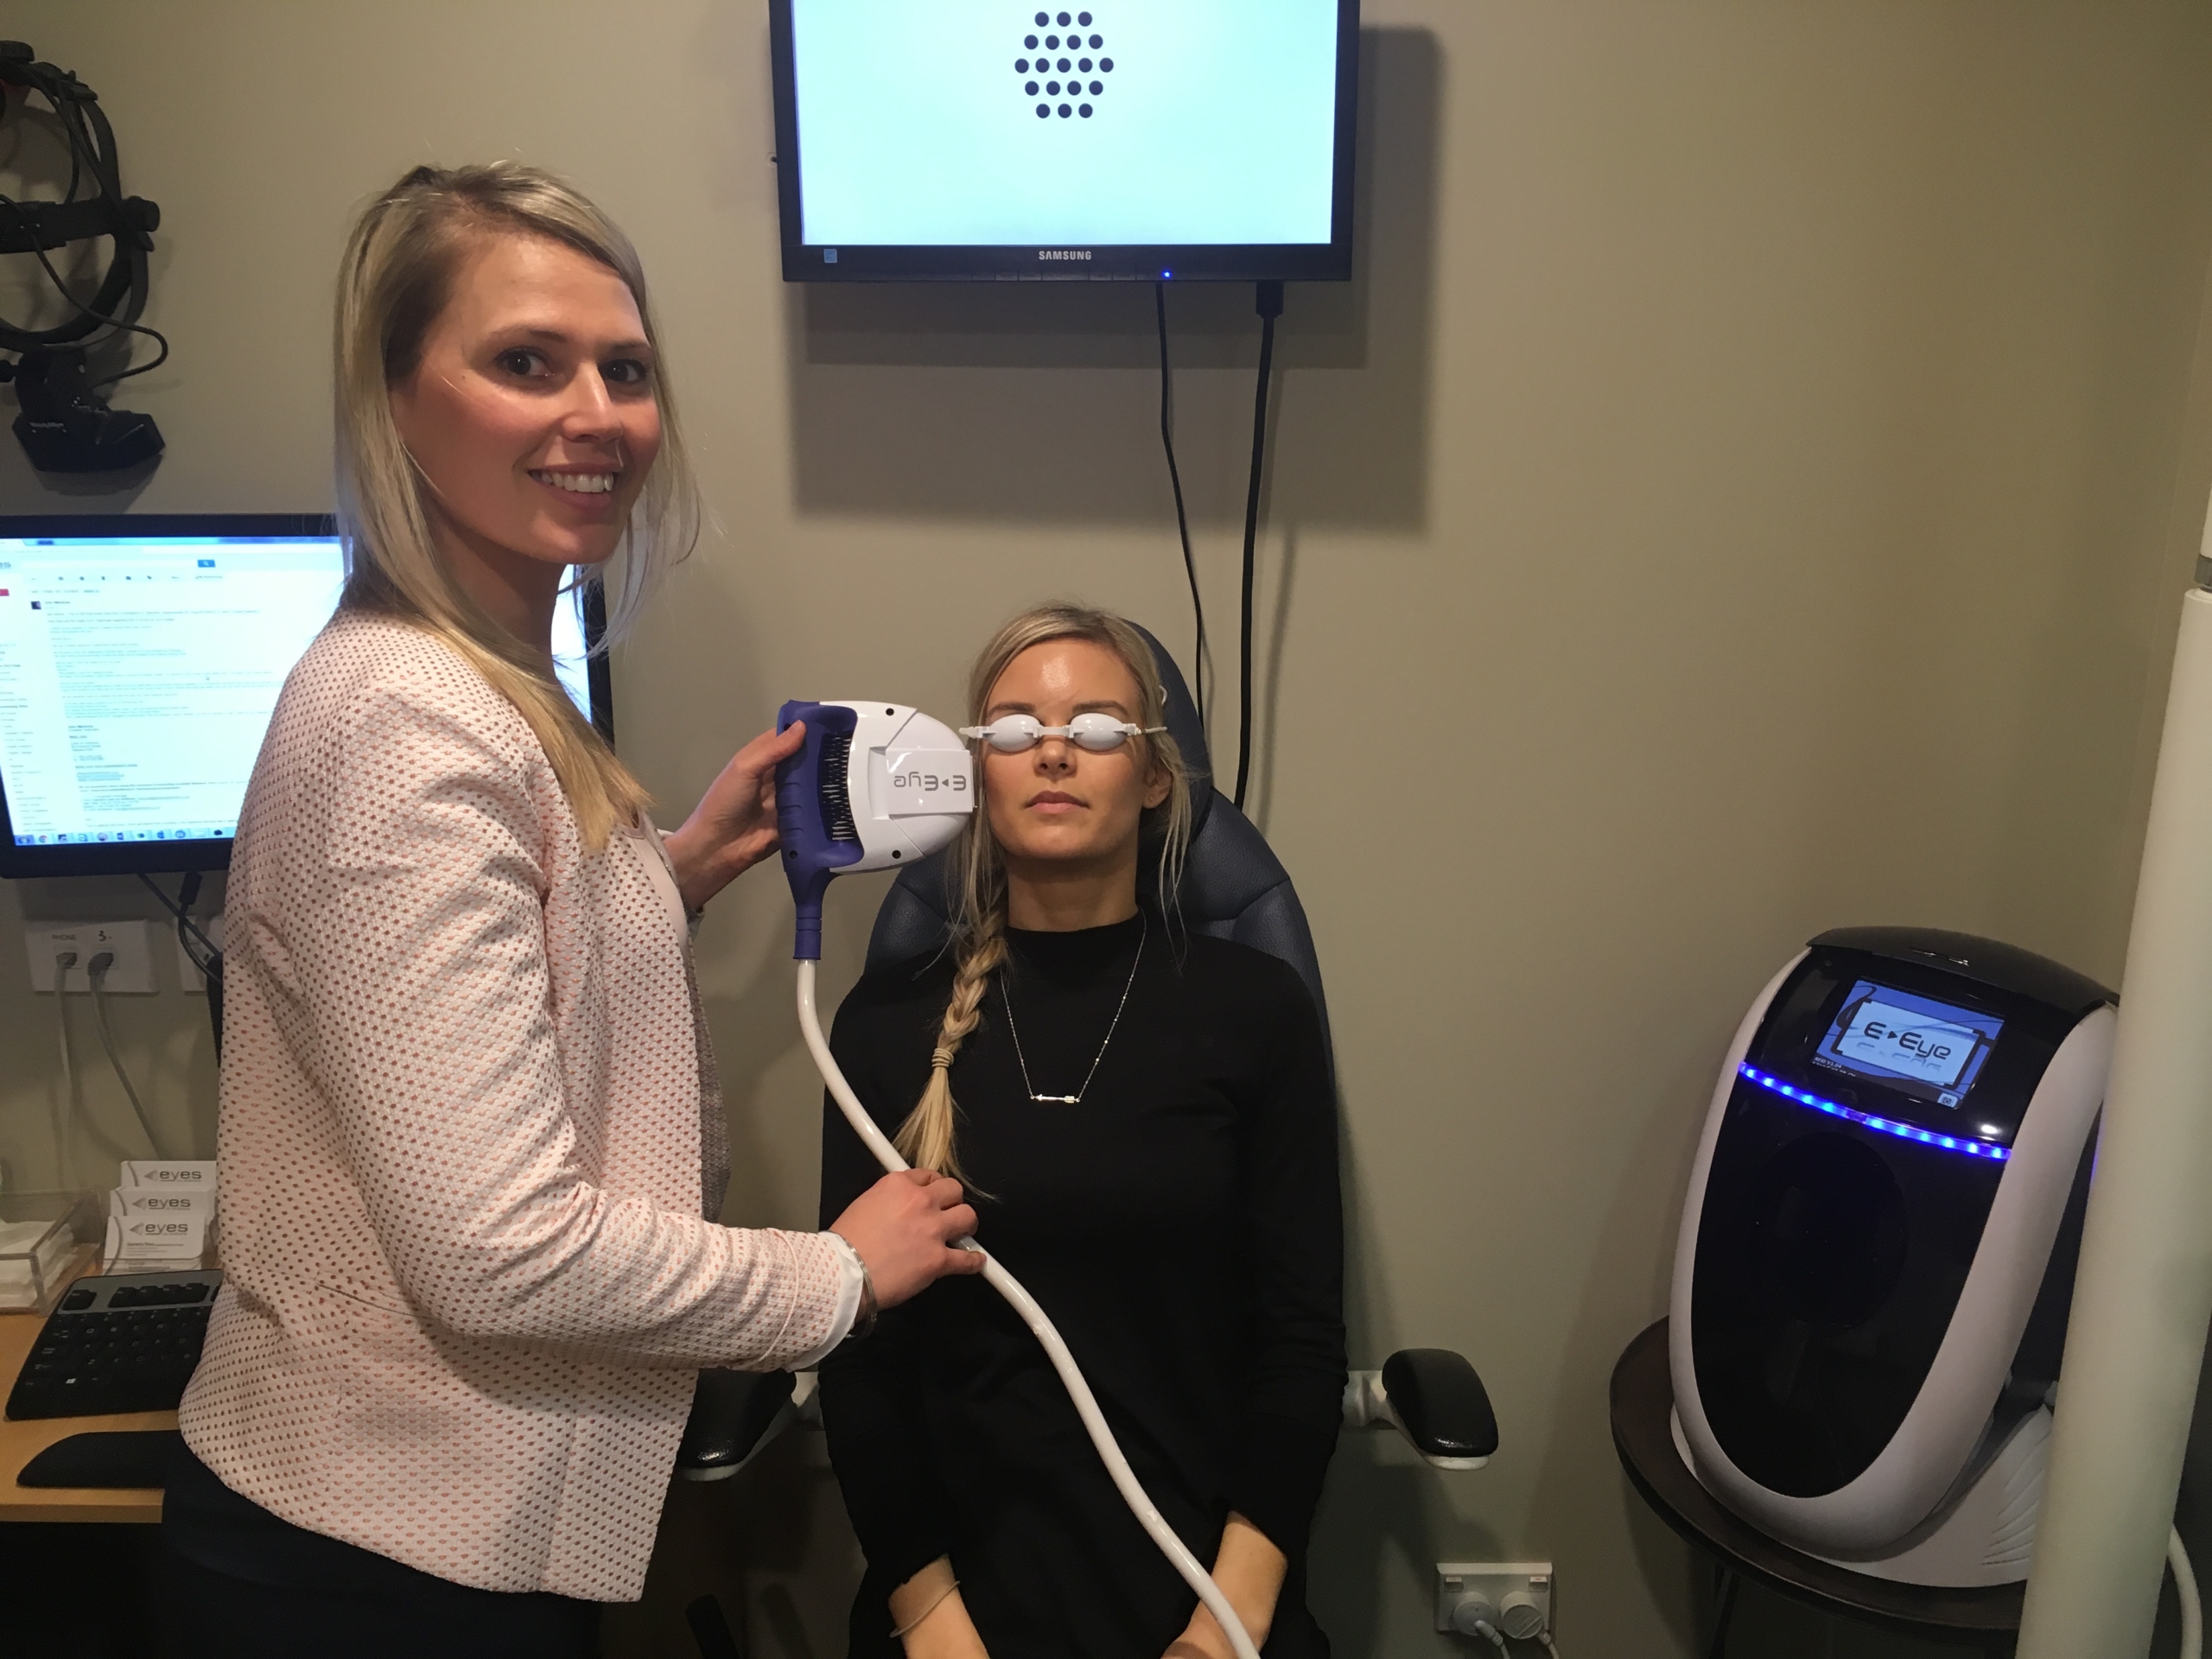 Wanaka’s Eyes on Ardmore acquires innovative technology to combat dry eyes